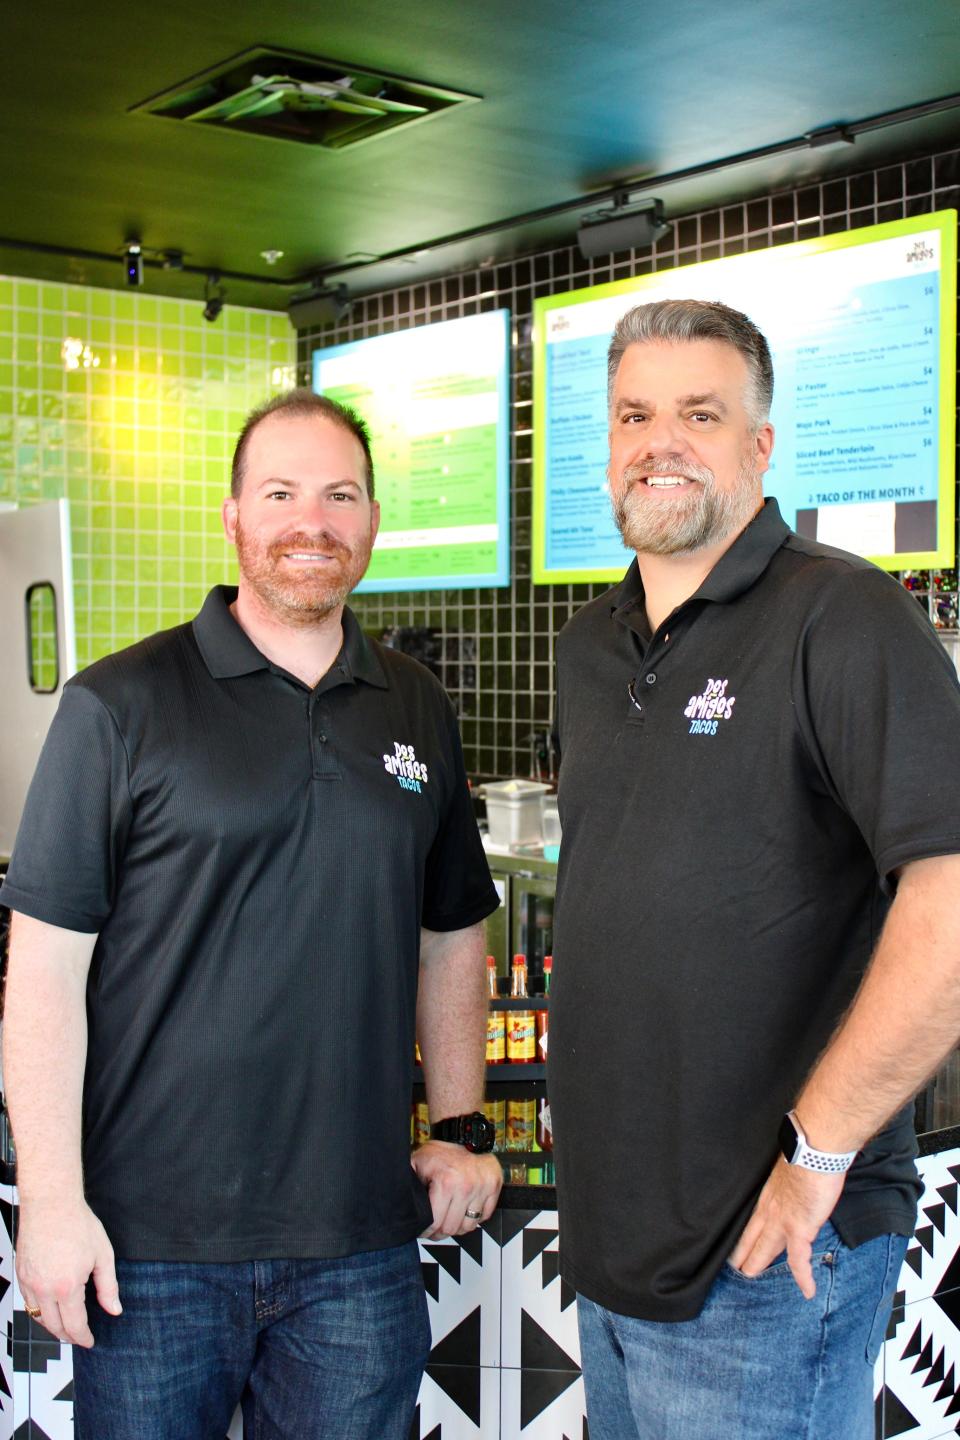 Dos Amigos Tacos founders Derek Mazer (left) and Michael Jameson share decades of experience in the food and beverage sector.  “We’re committed to ensuring excellent standards that consistently deliver outstanding and enjoyable experiences for every customer,” says Mazer.